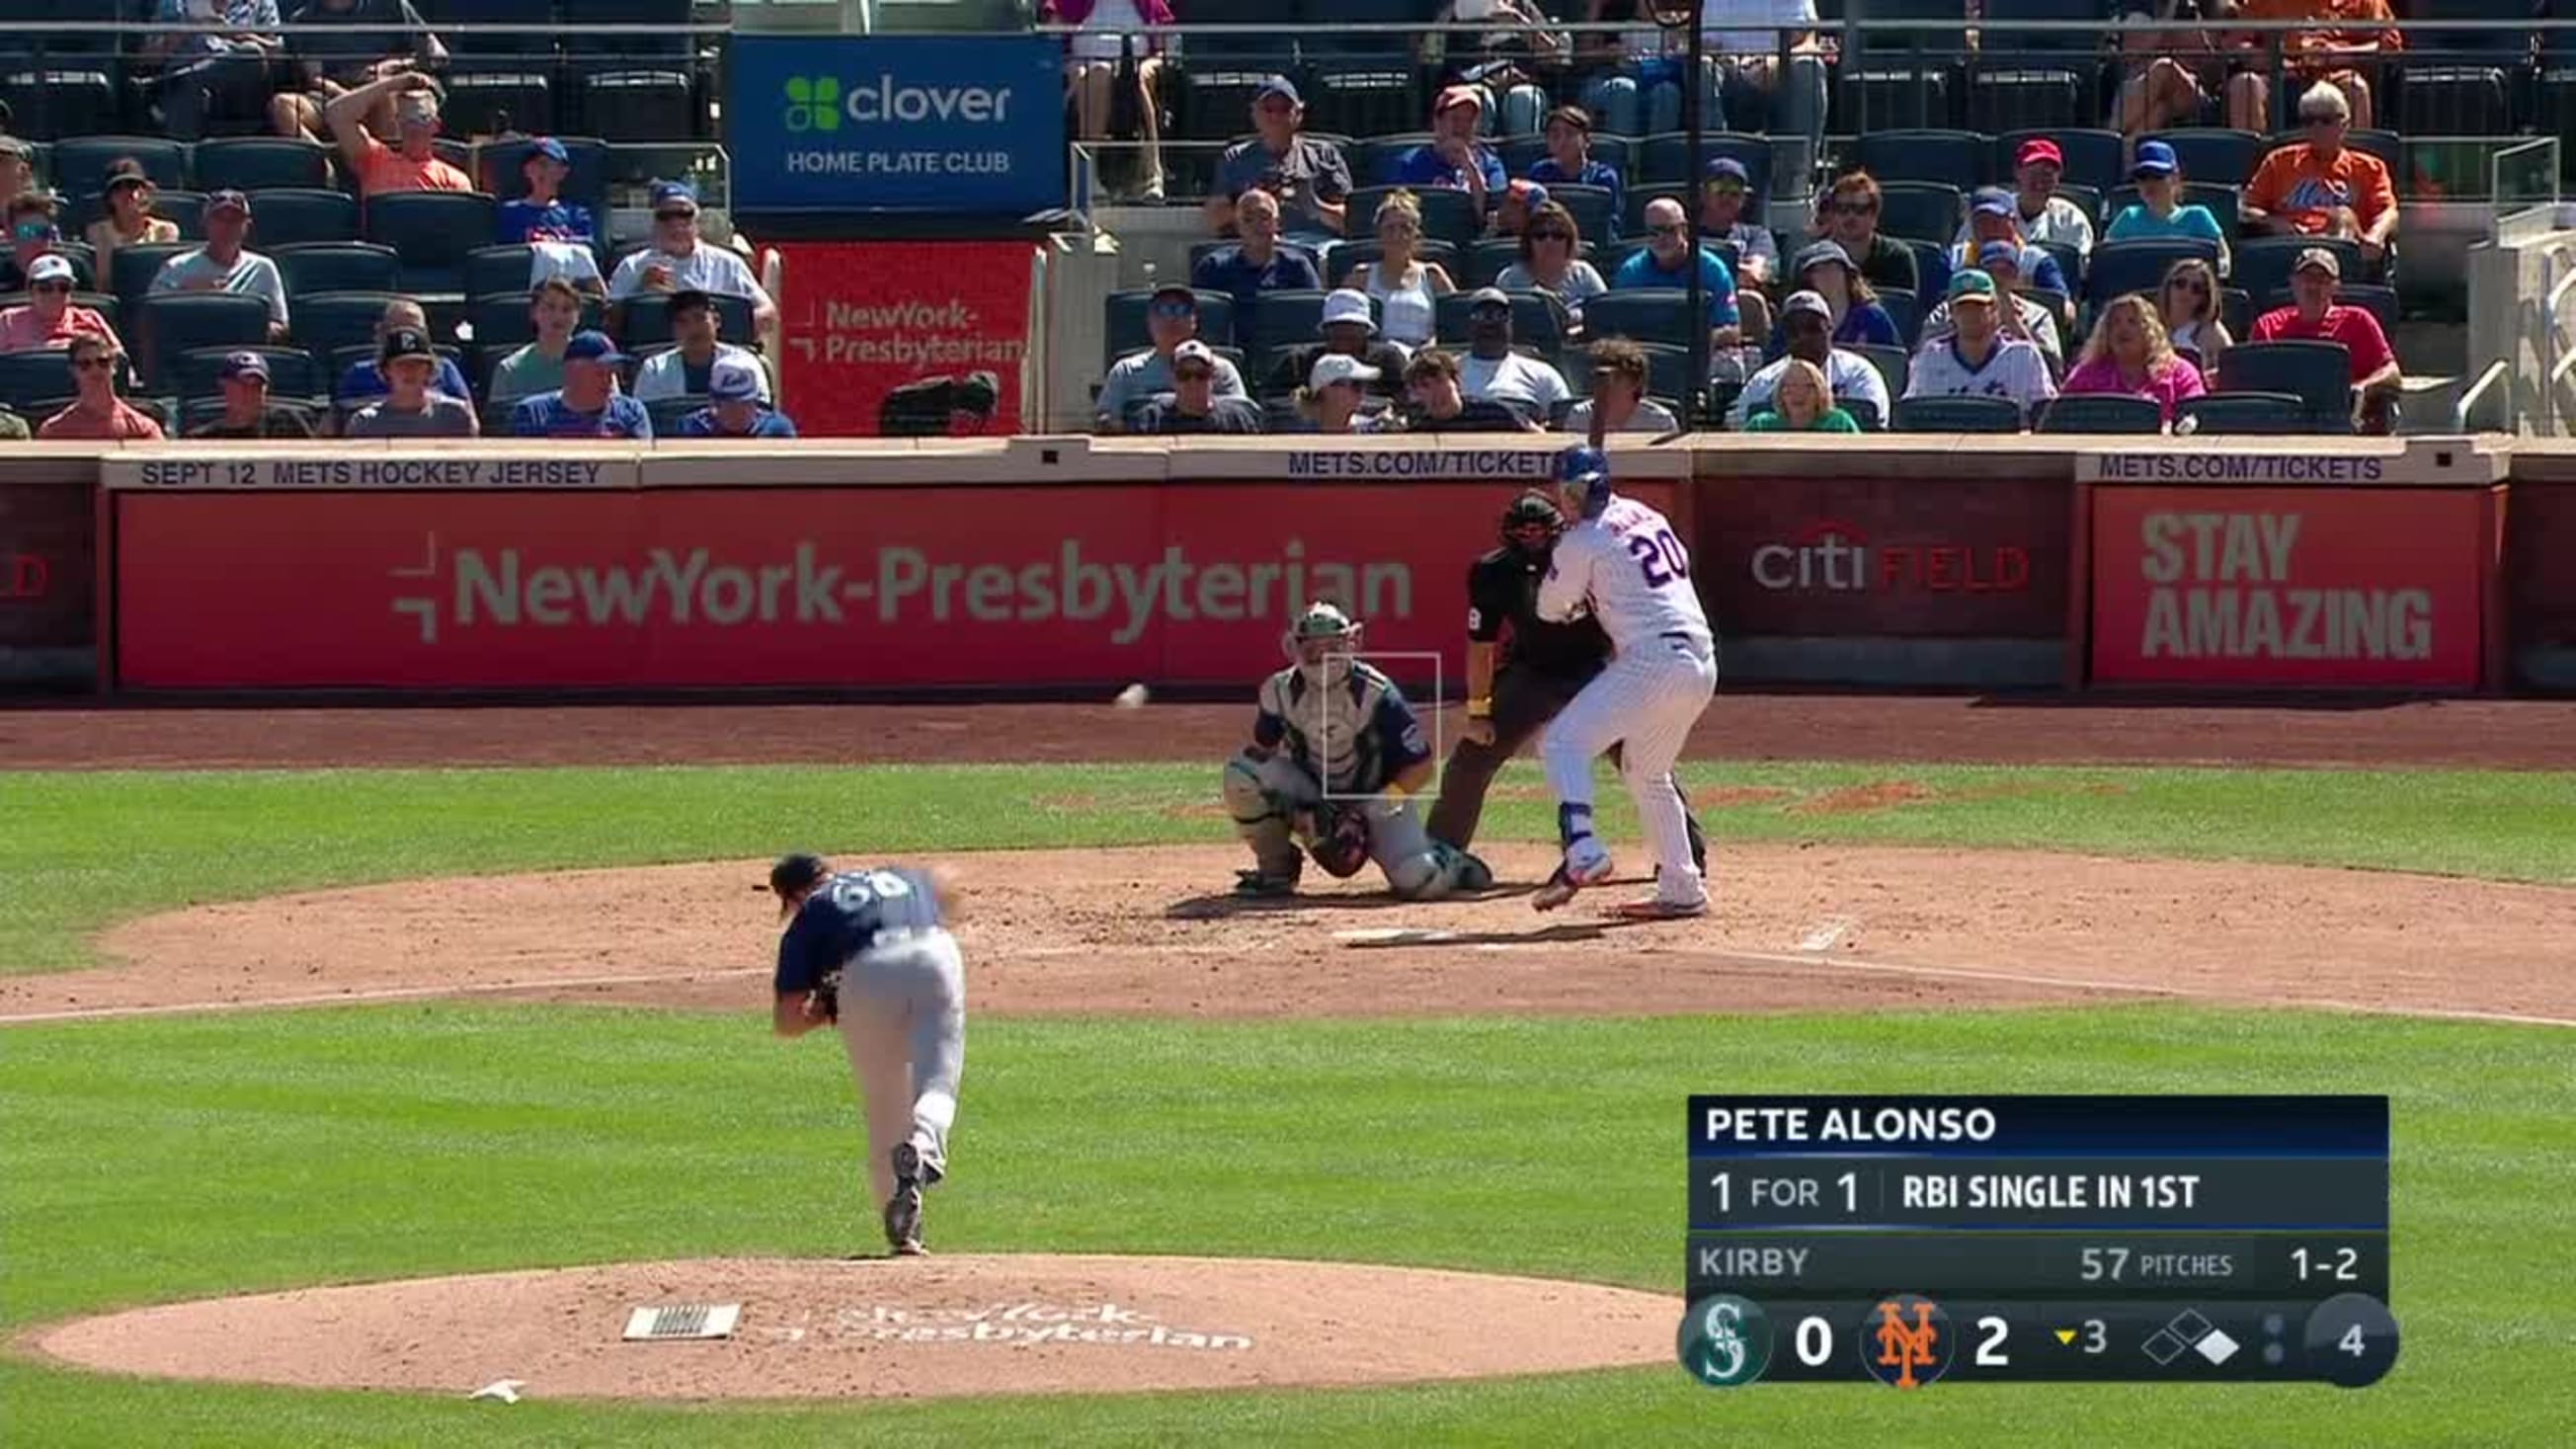 Polar bear POP! Pete Alonso SMASHES his 40th homer of the year